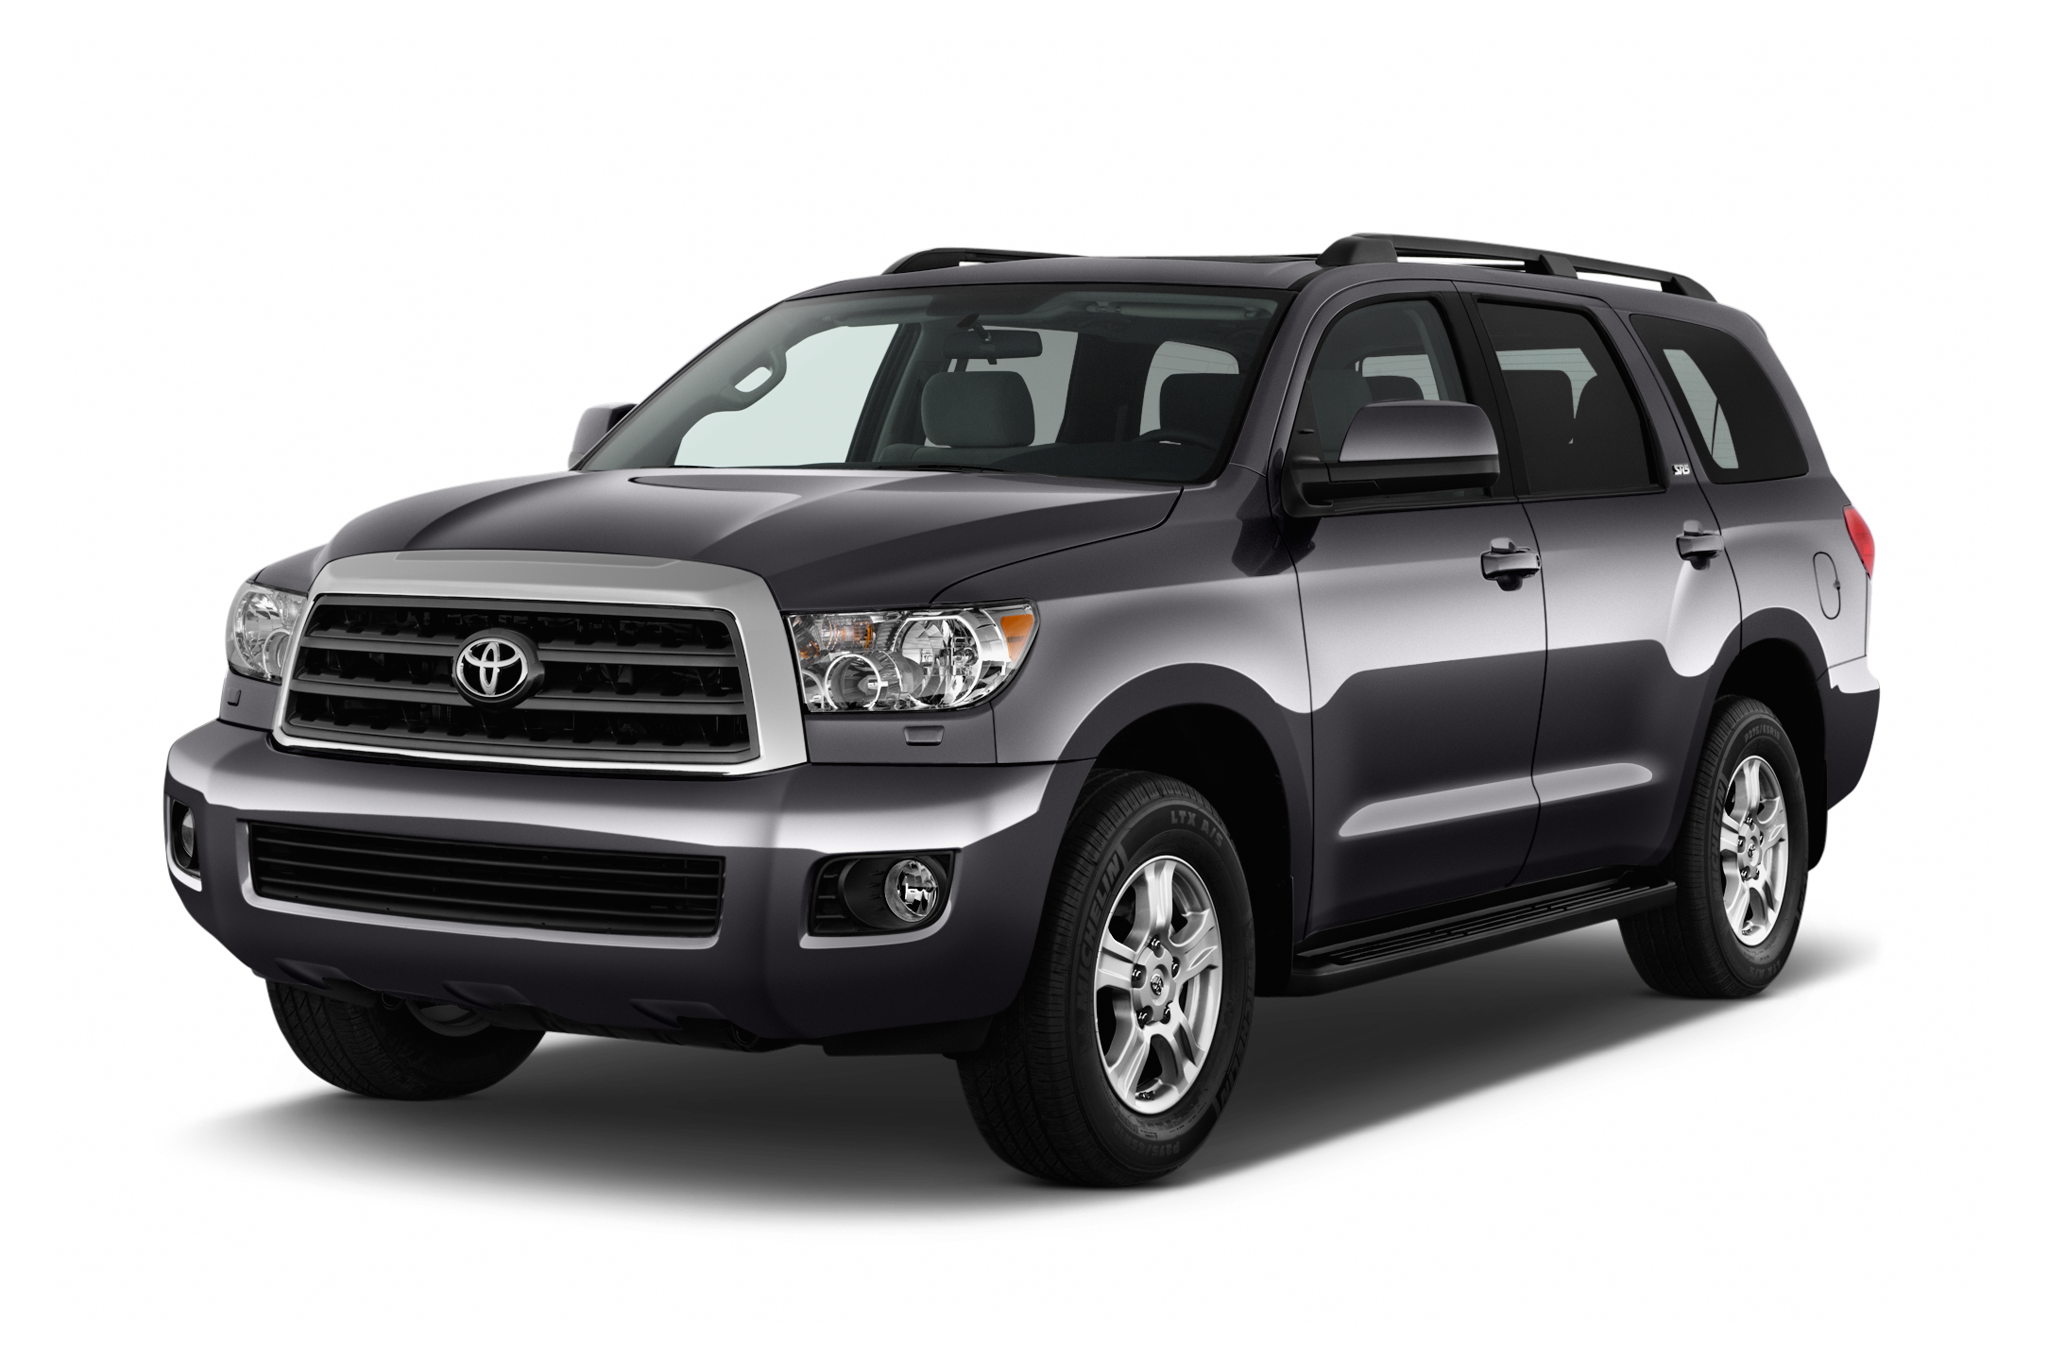 Toyota SUV - International Prices & Overview